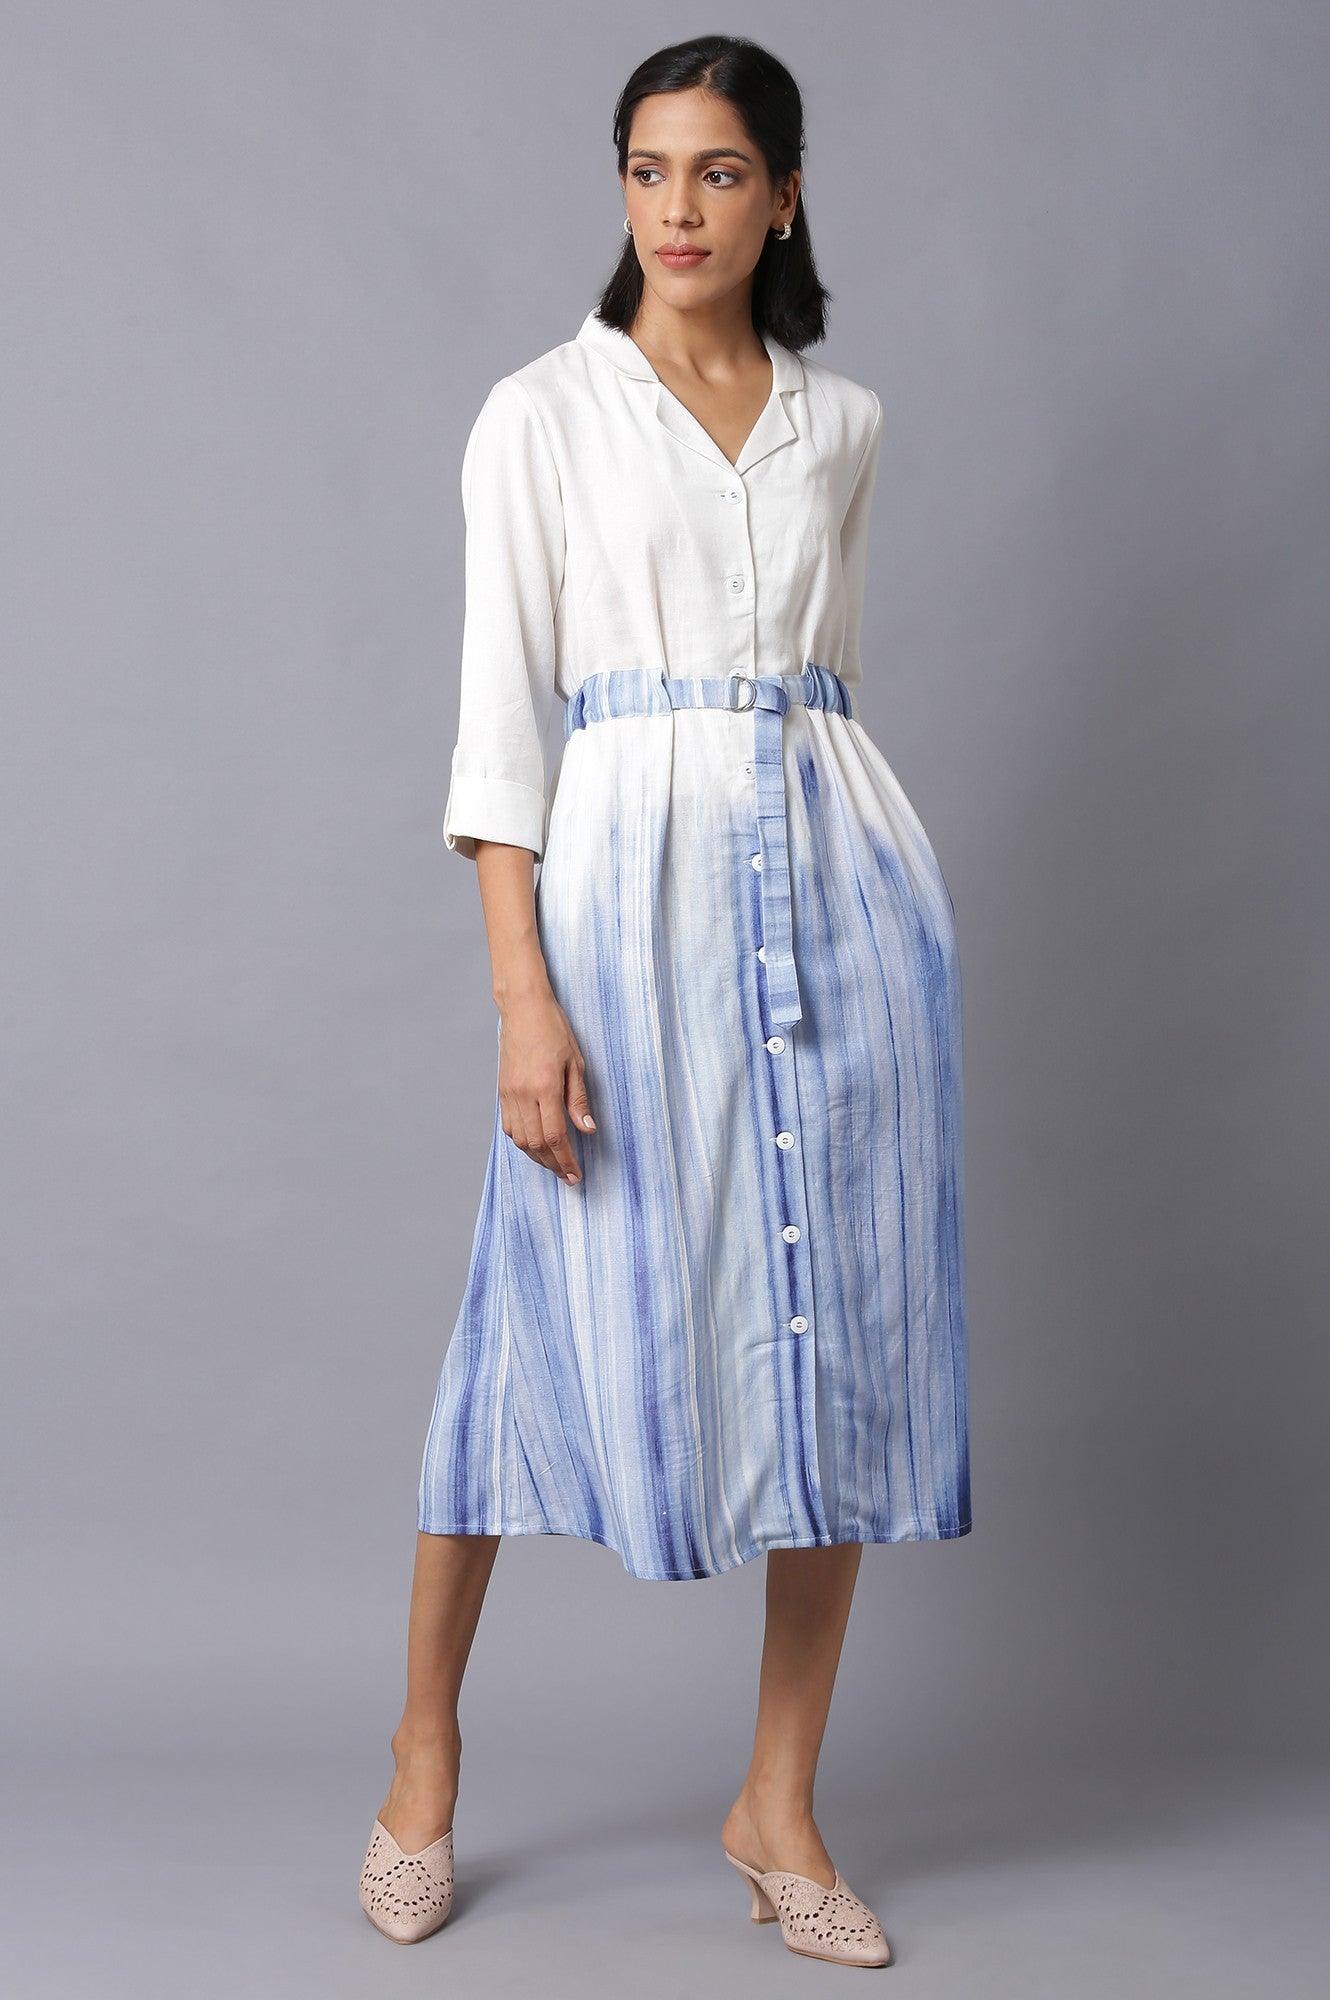 White And Blue Lapel Collar Shirt Dress With Belt - wforwoman